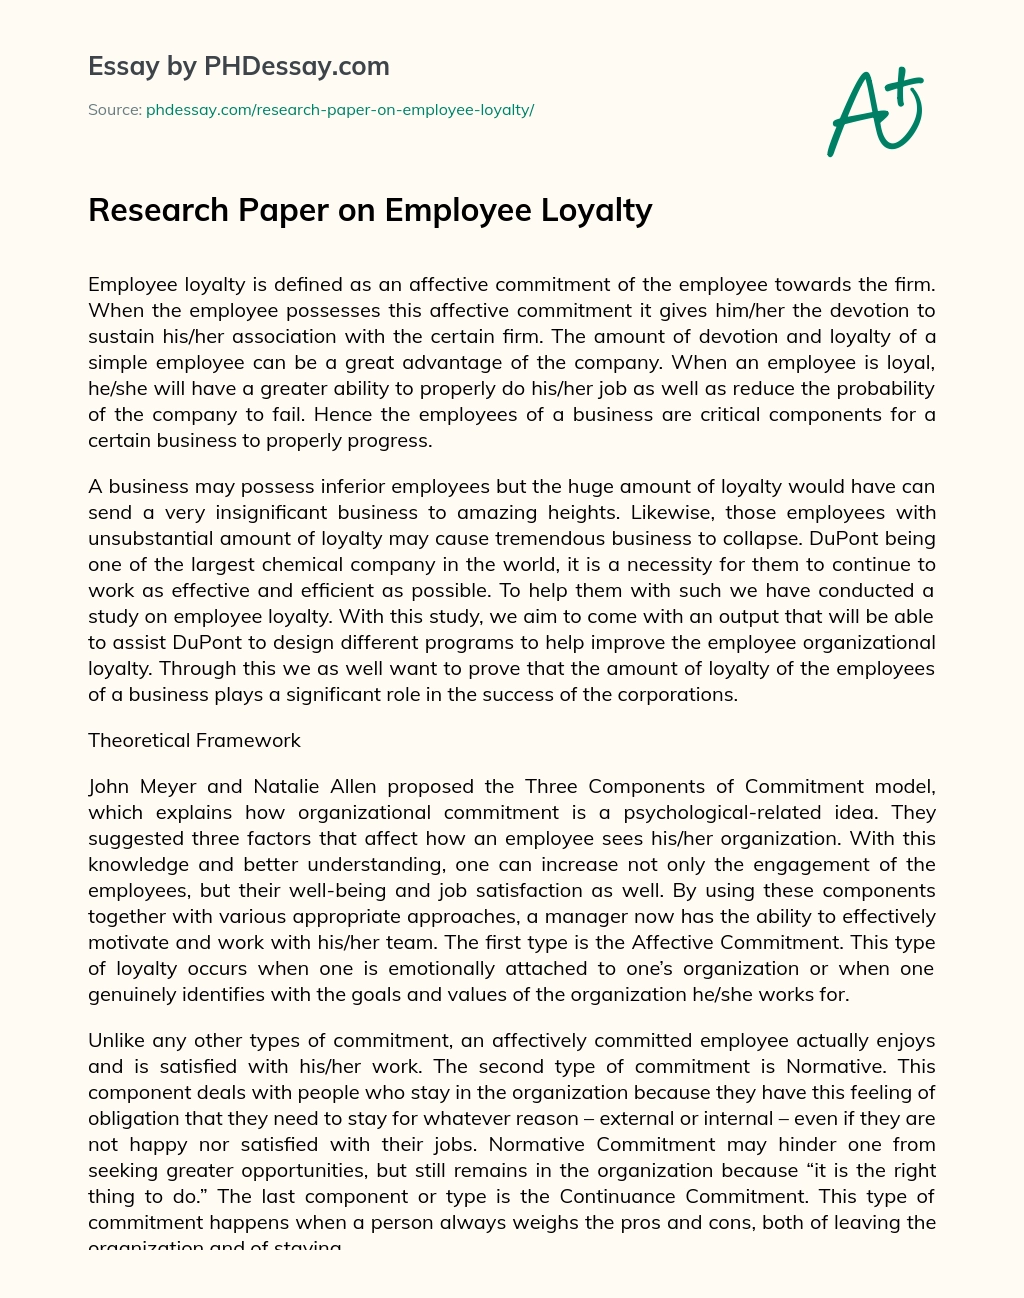 Research Paper on Employee Loyalty essay